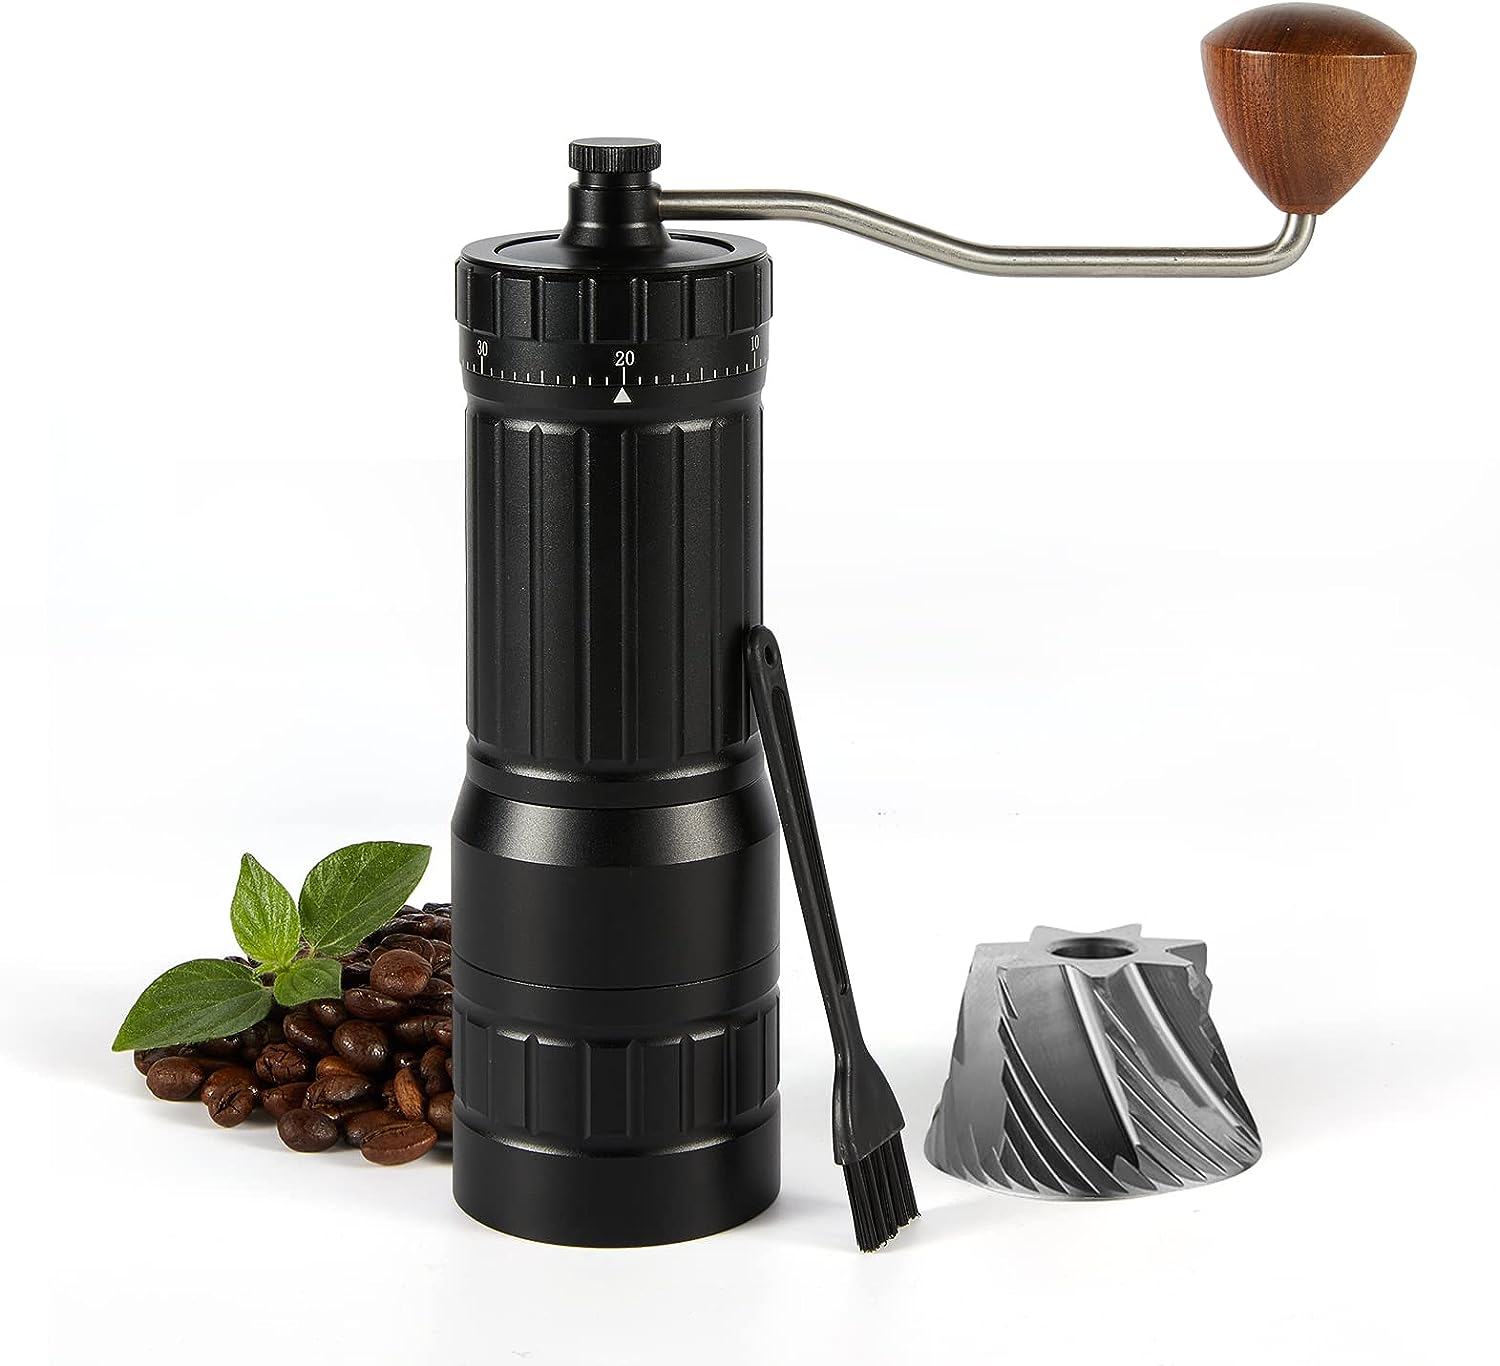 CONQUECO Coffee grinder manual cone grinder: external adjustable grinding degree - hand mill made of stainless steel and cone shaped - capacity max. 40 g